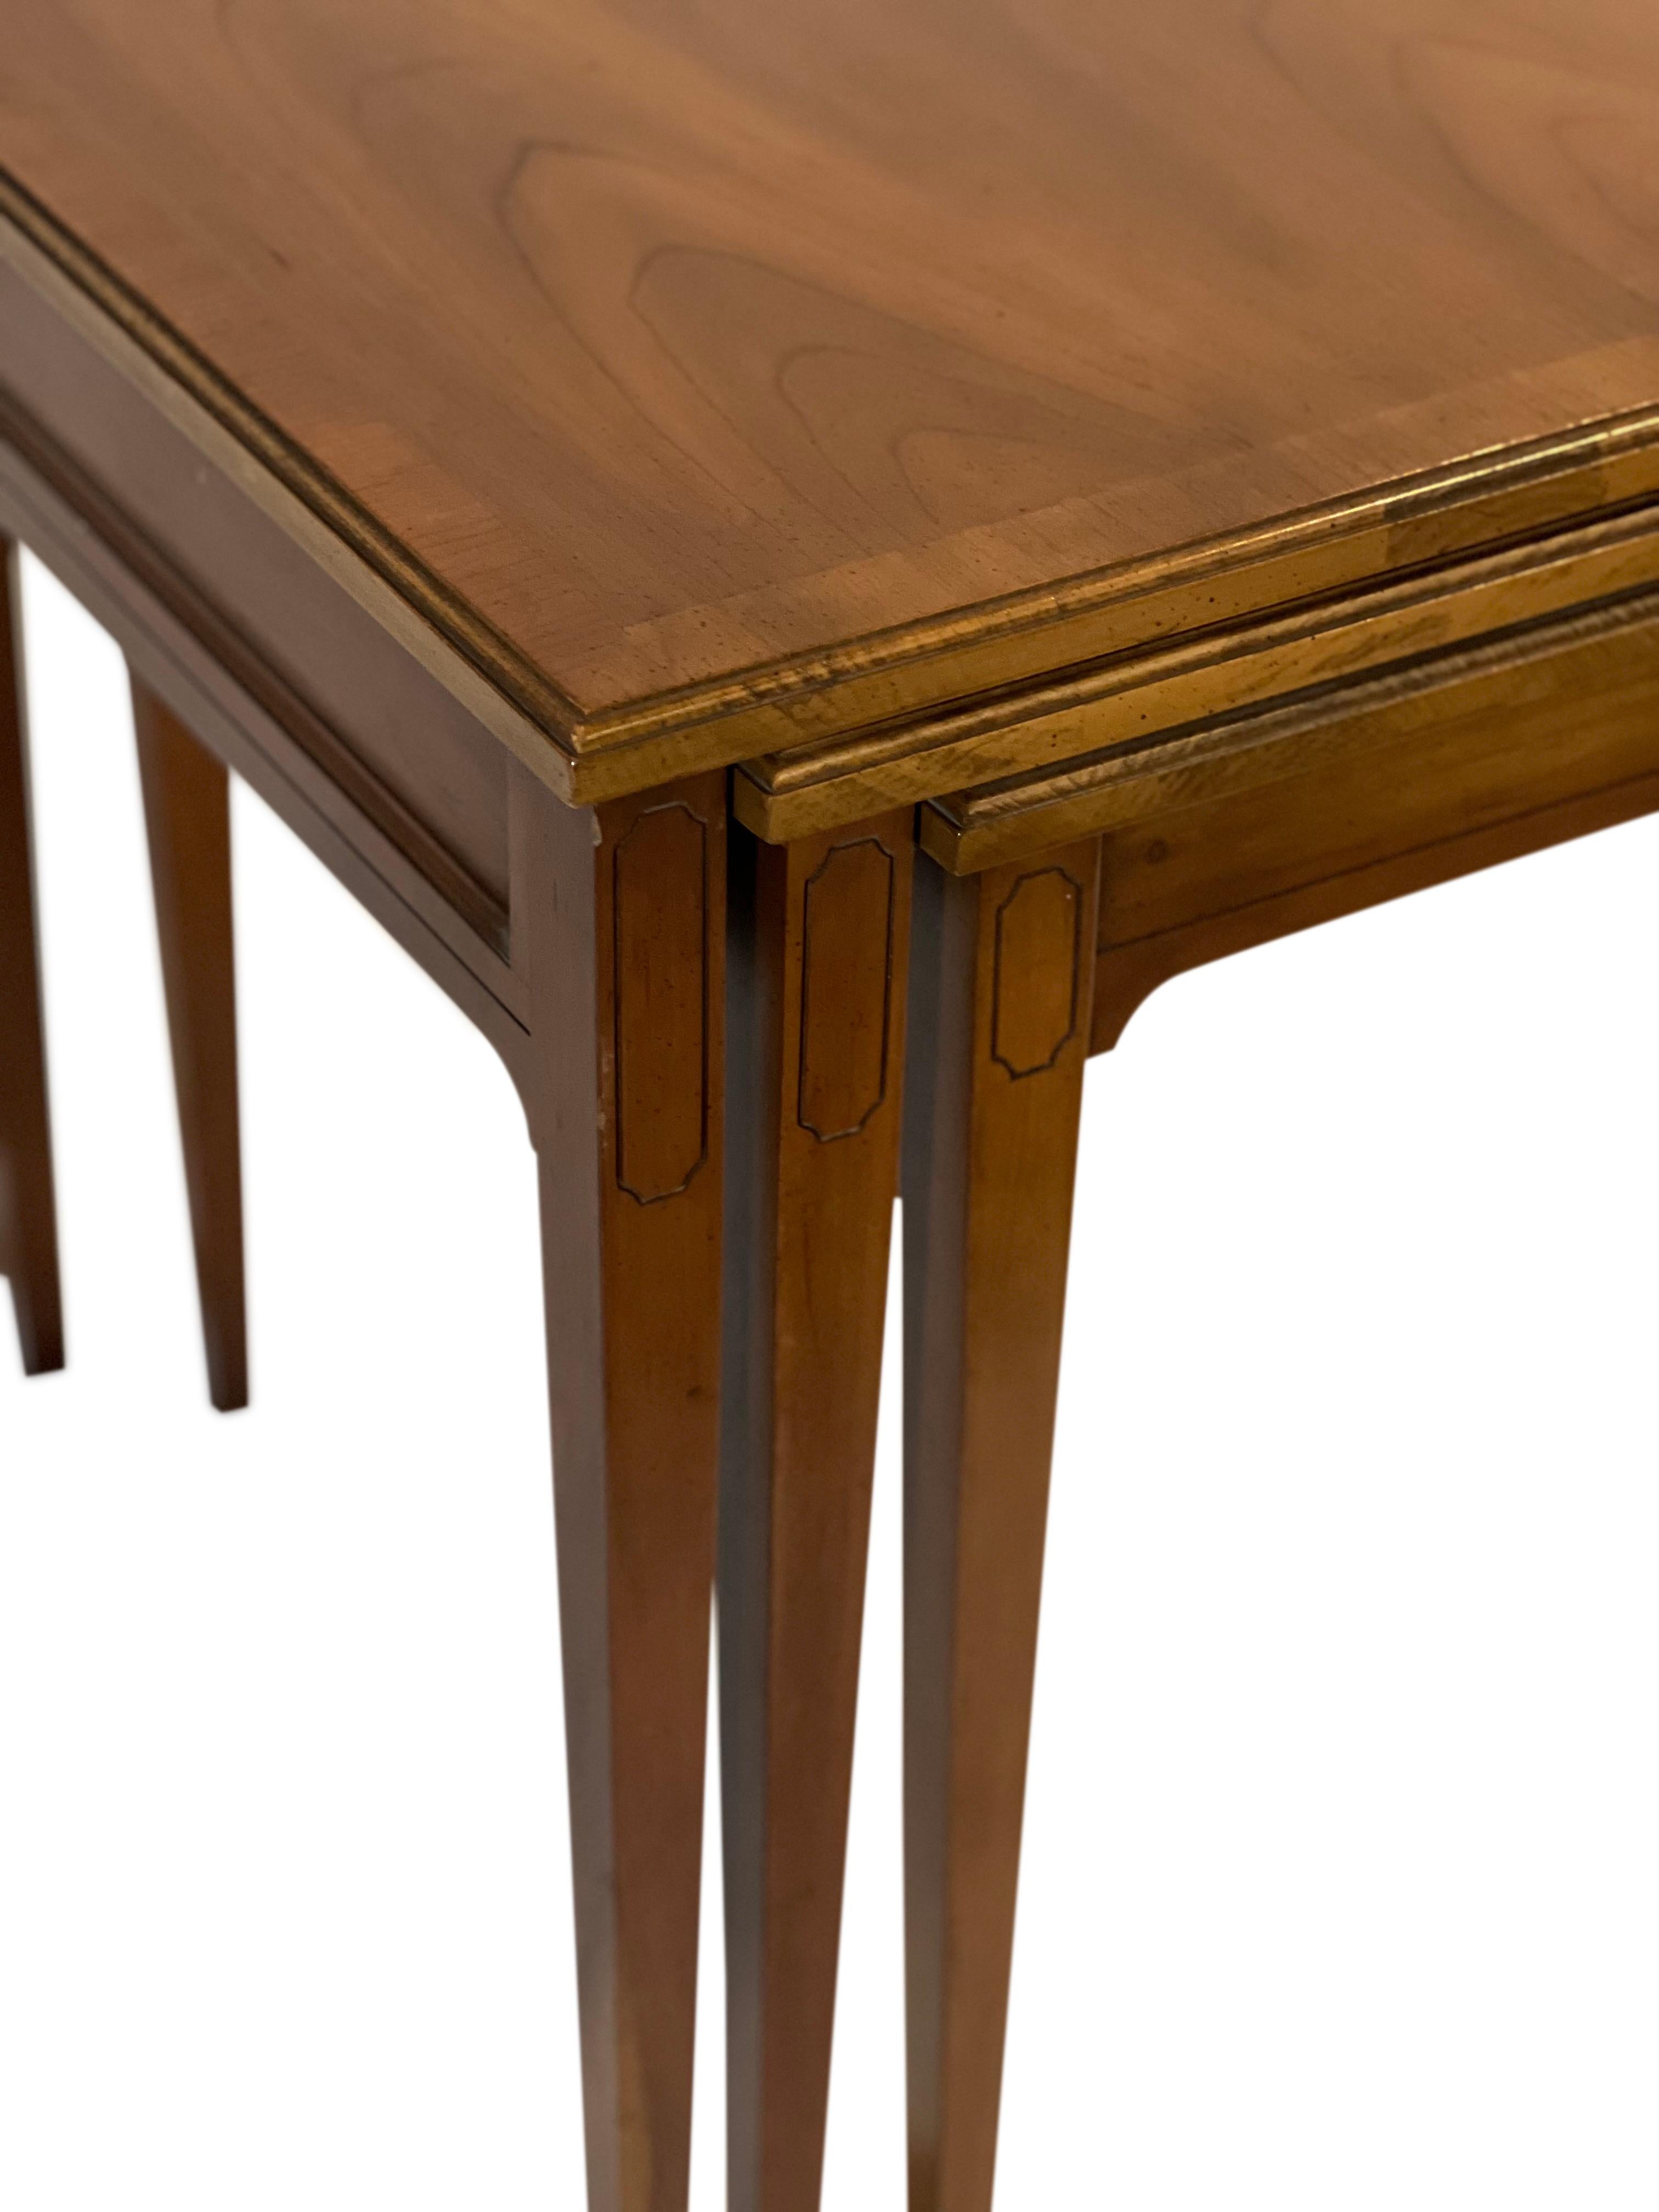 Midcentury Fruitwood Nesting Tables by Heritage, Set of 3 For Sale 3